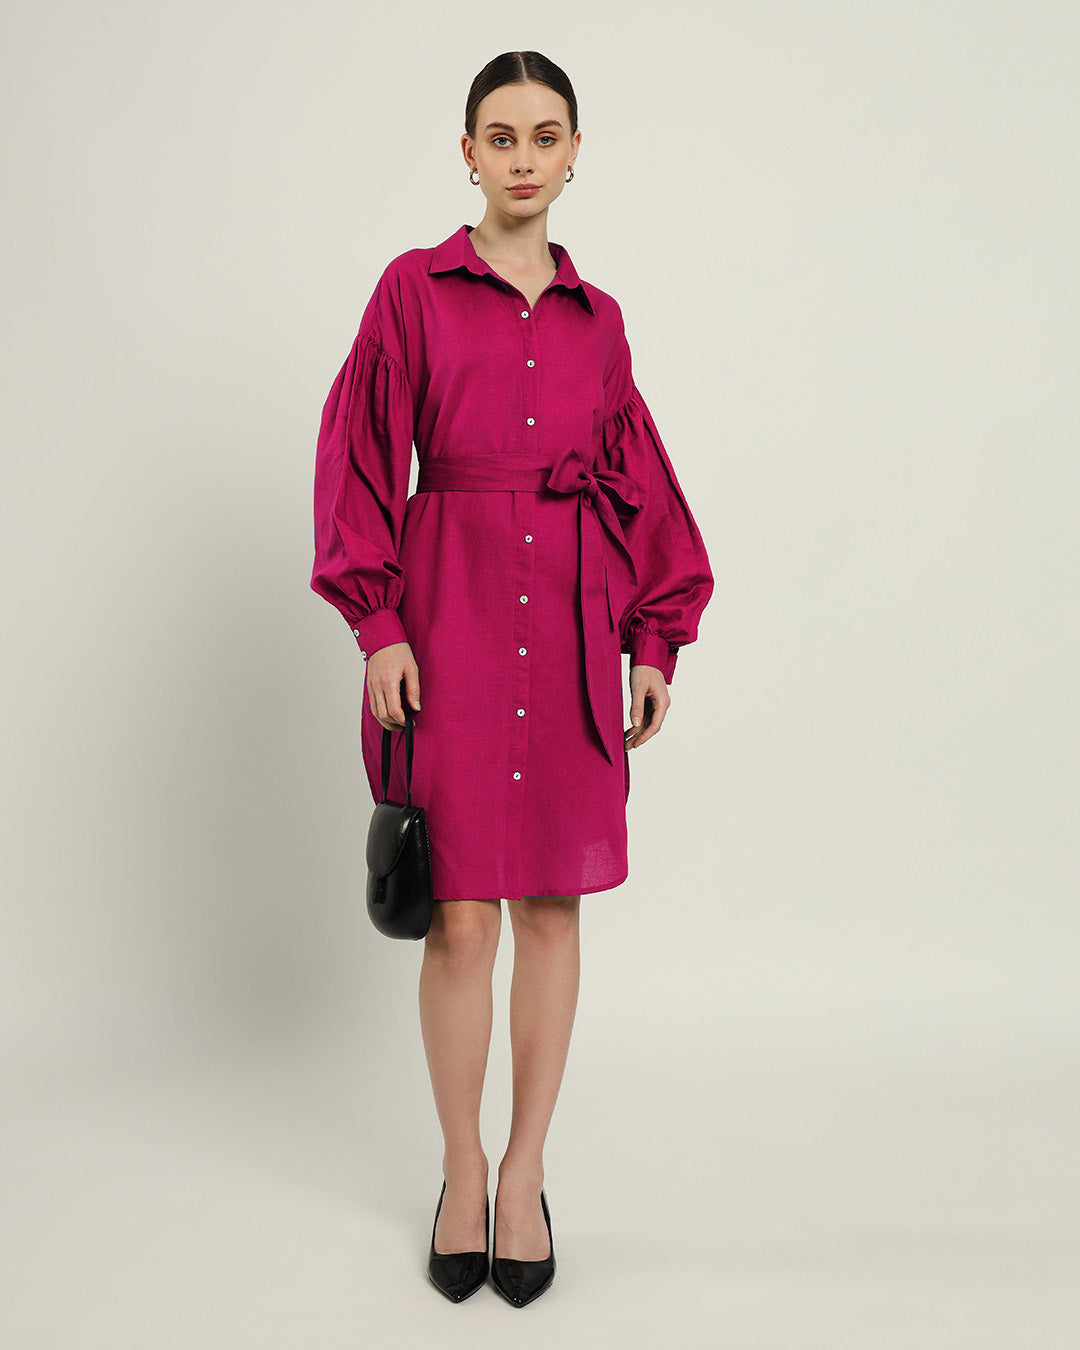 The Derby Berry Dress